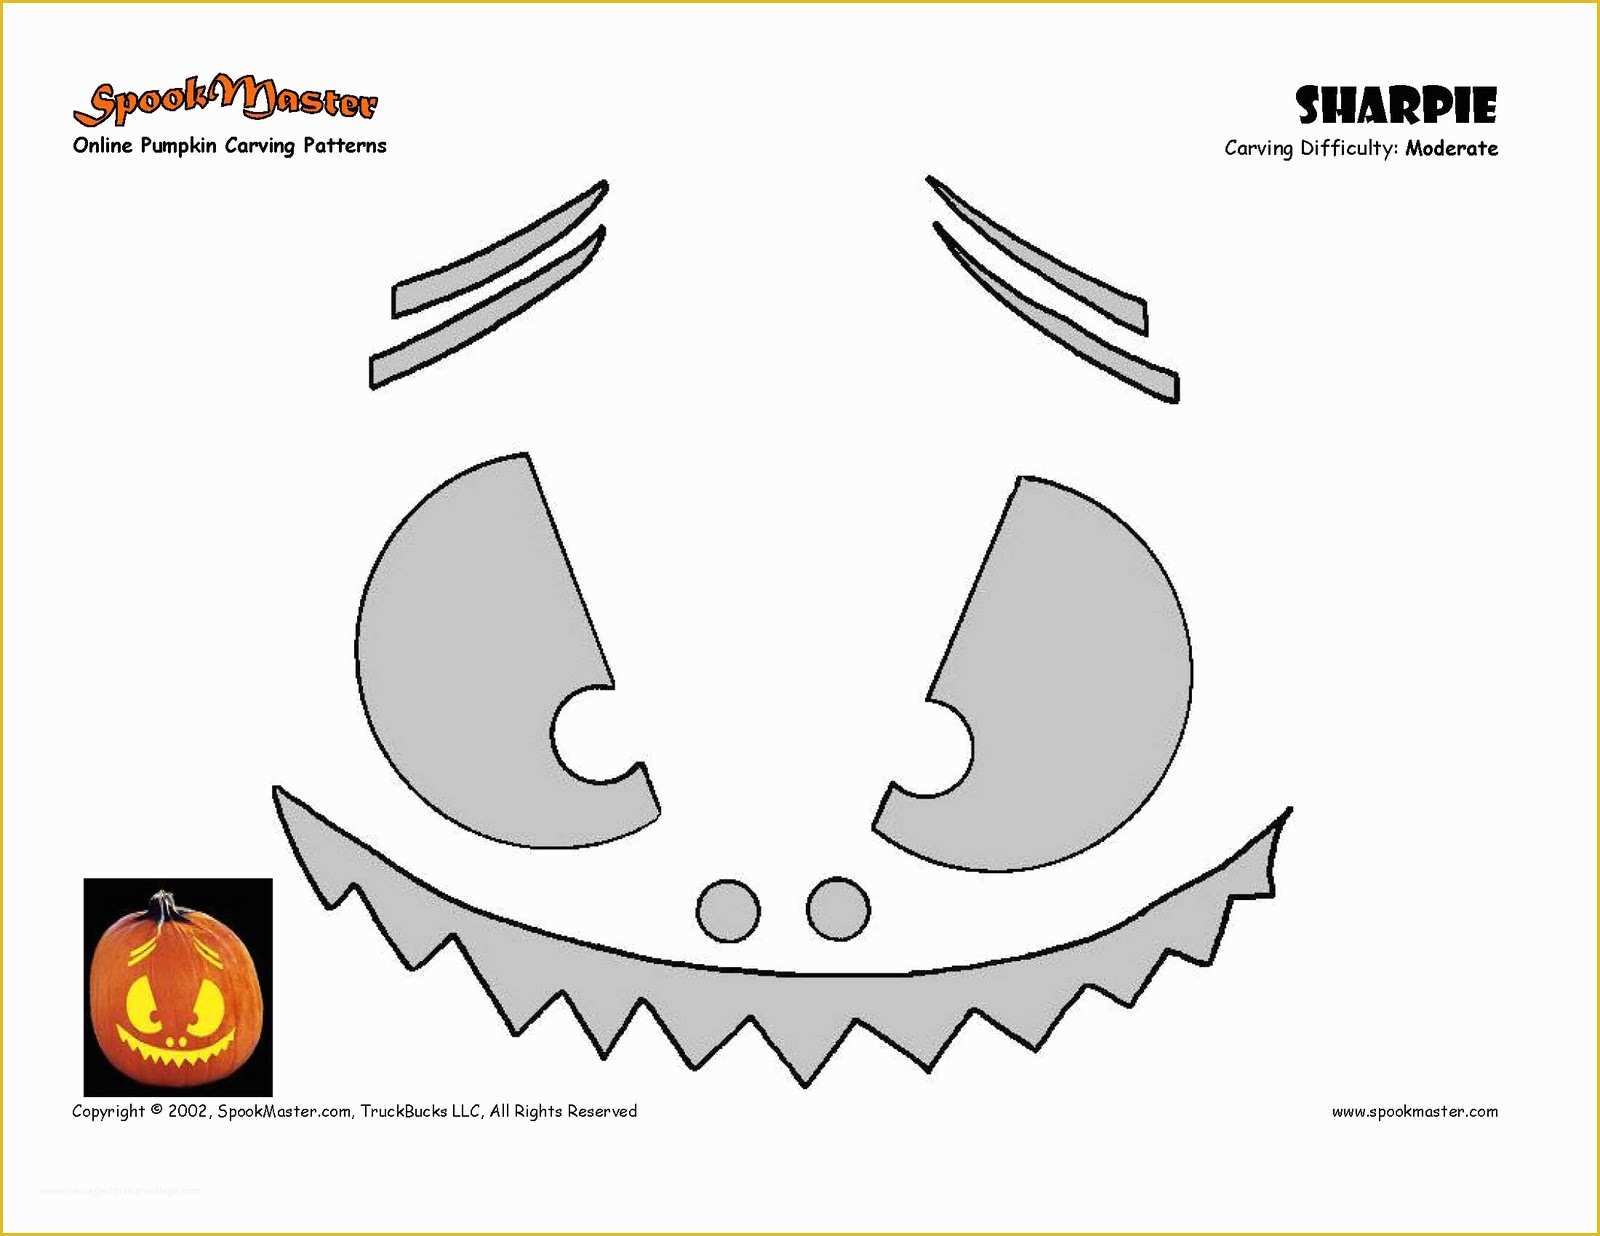 Pumpkin Carving Ideas Templates Free Of Lonely Paper Designs Freebies Pumpkin Carving Templates